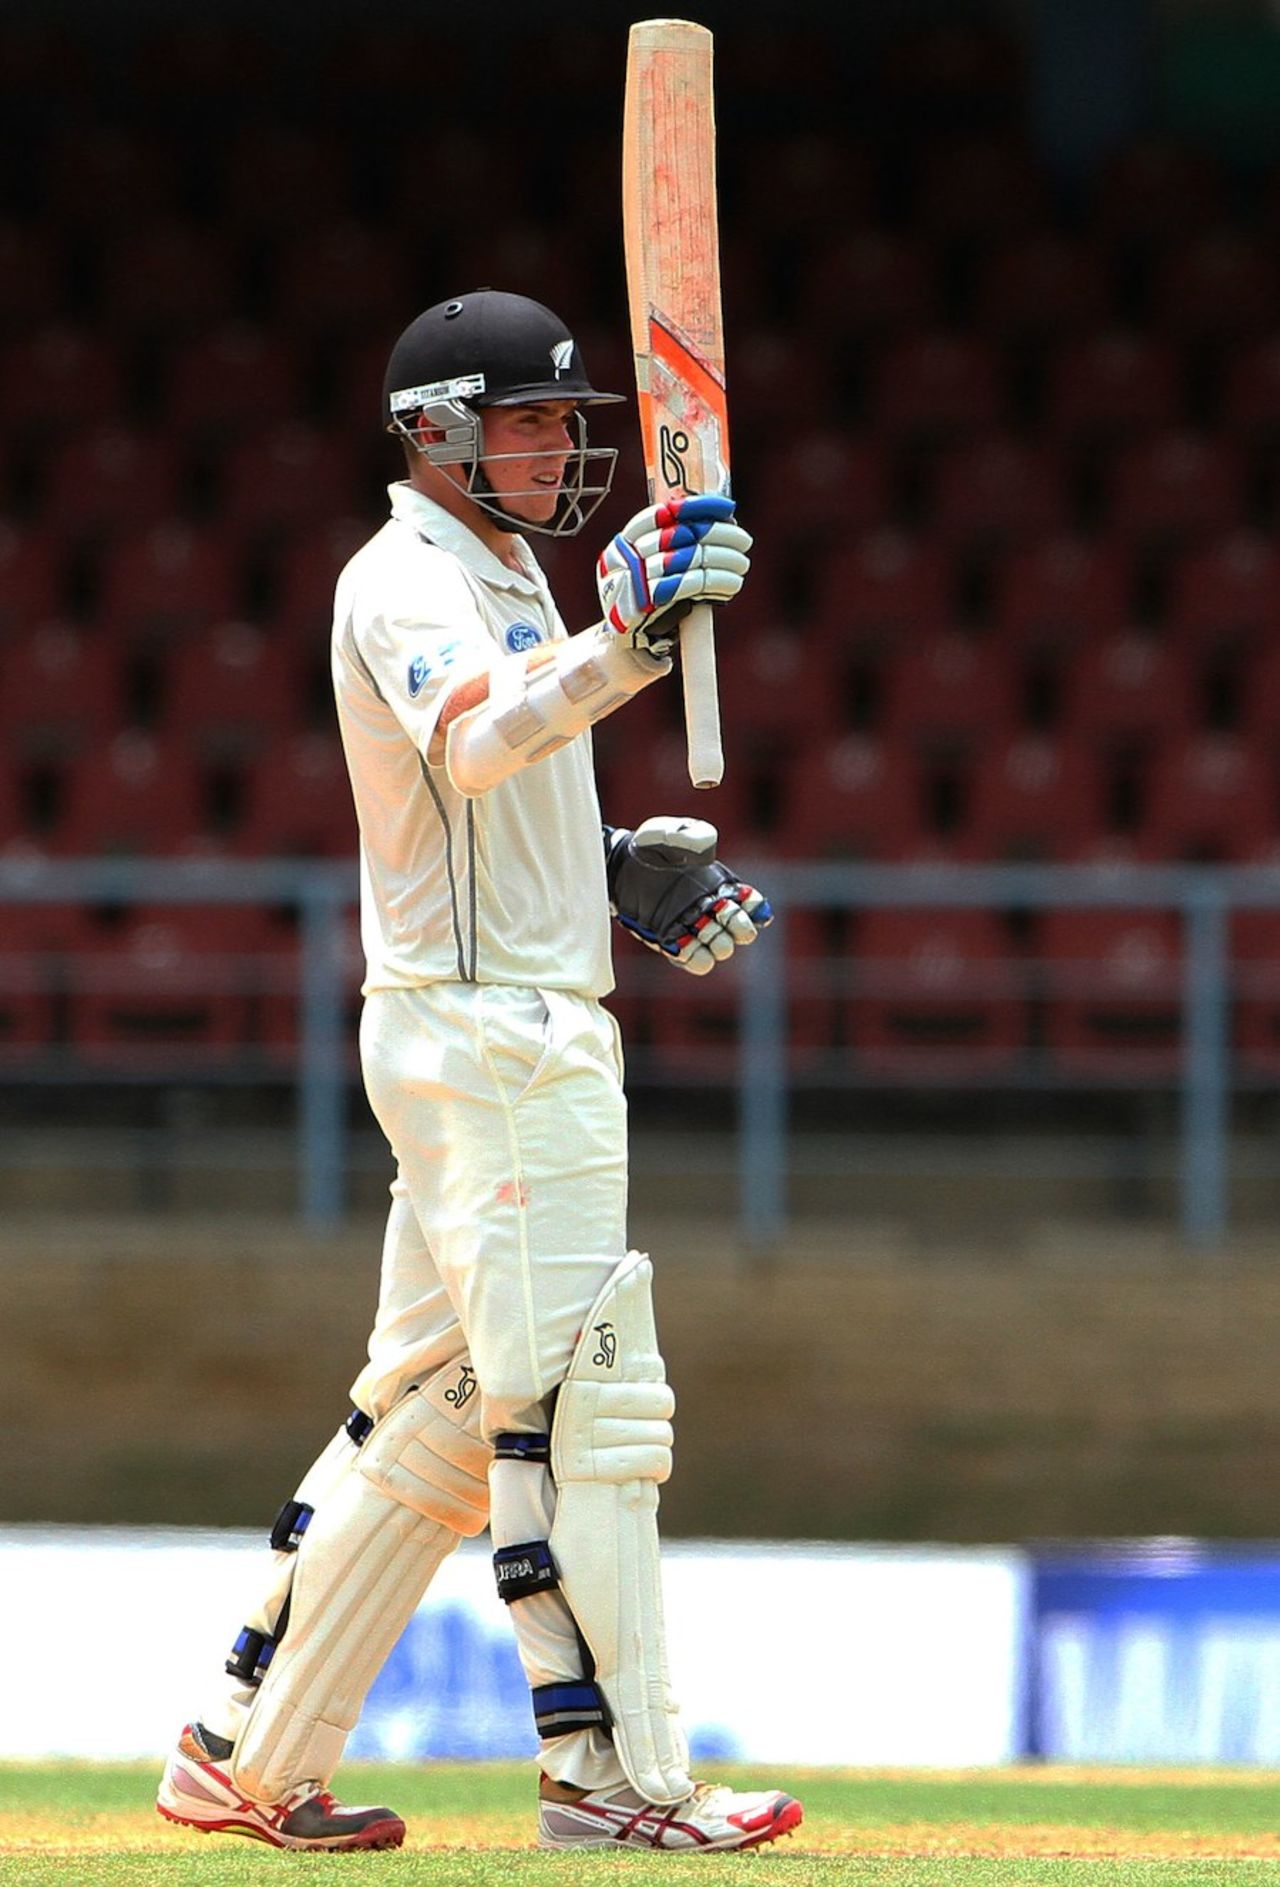 Tom Latham brings up his fifty, West Indies v New Zealand, 2nd Test, Trinidad, 1st day, June 16, 2014